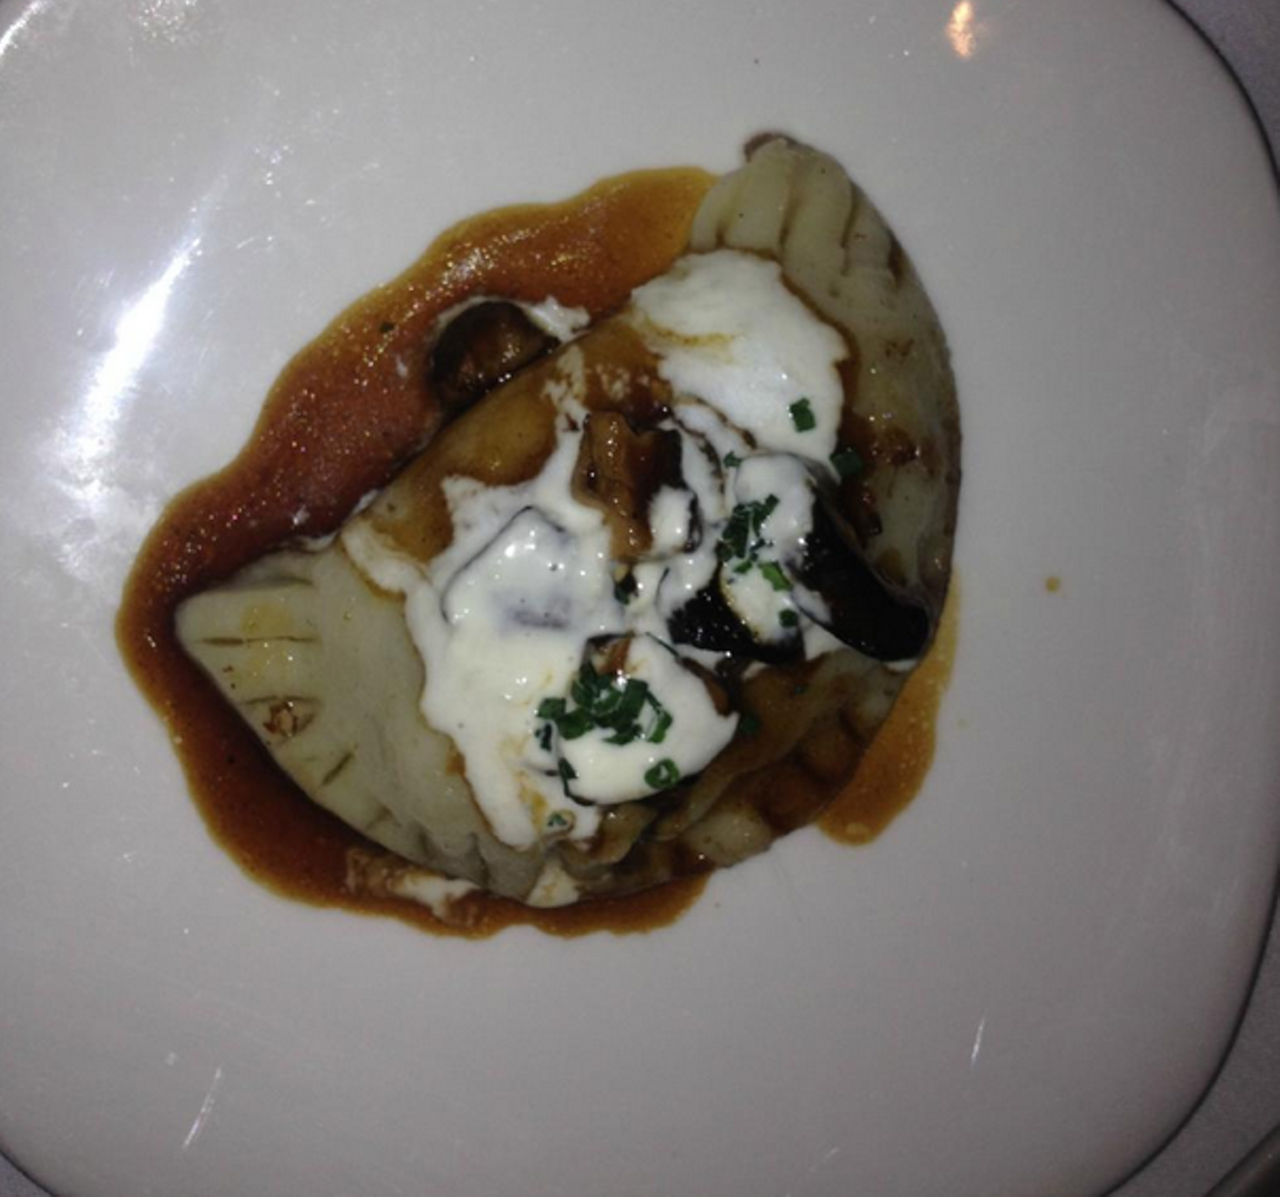 The Iron Chef pays homage to our staple food with Lola's beef cheek pierogi with wild mushrooms and a horseradish creme fraiche. Dig in at 2058 E. 4th St., Cleveland, 216.621.5652.